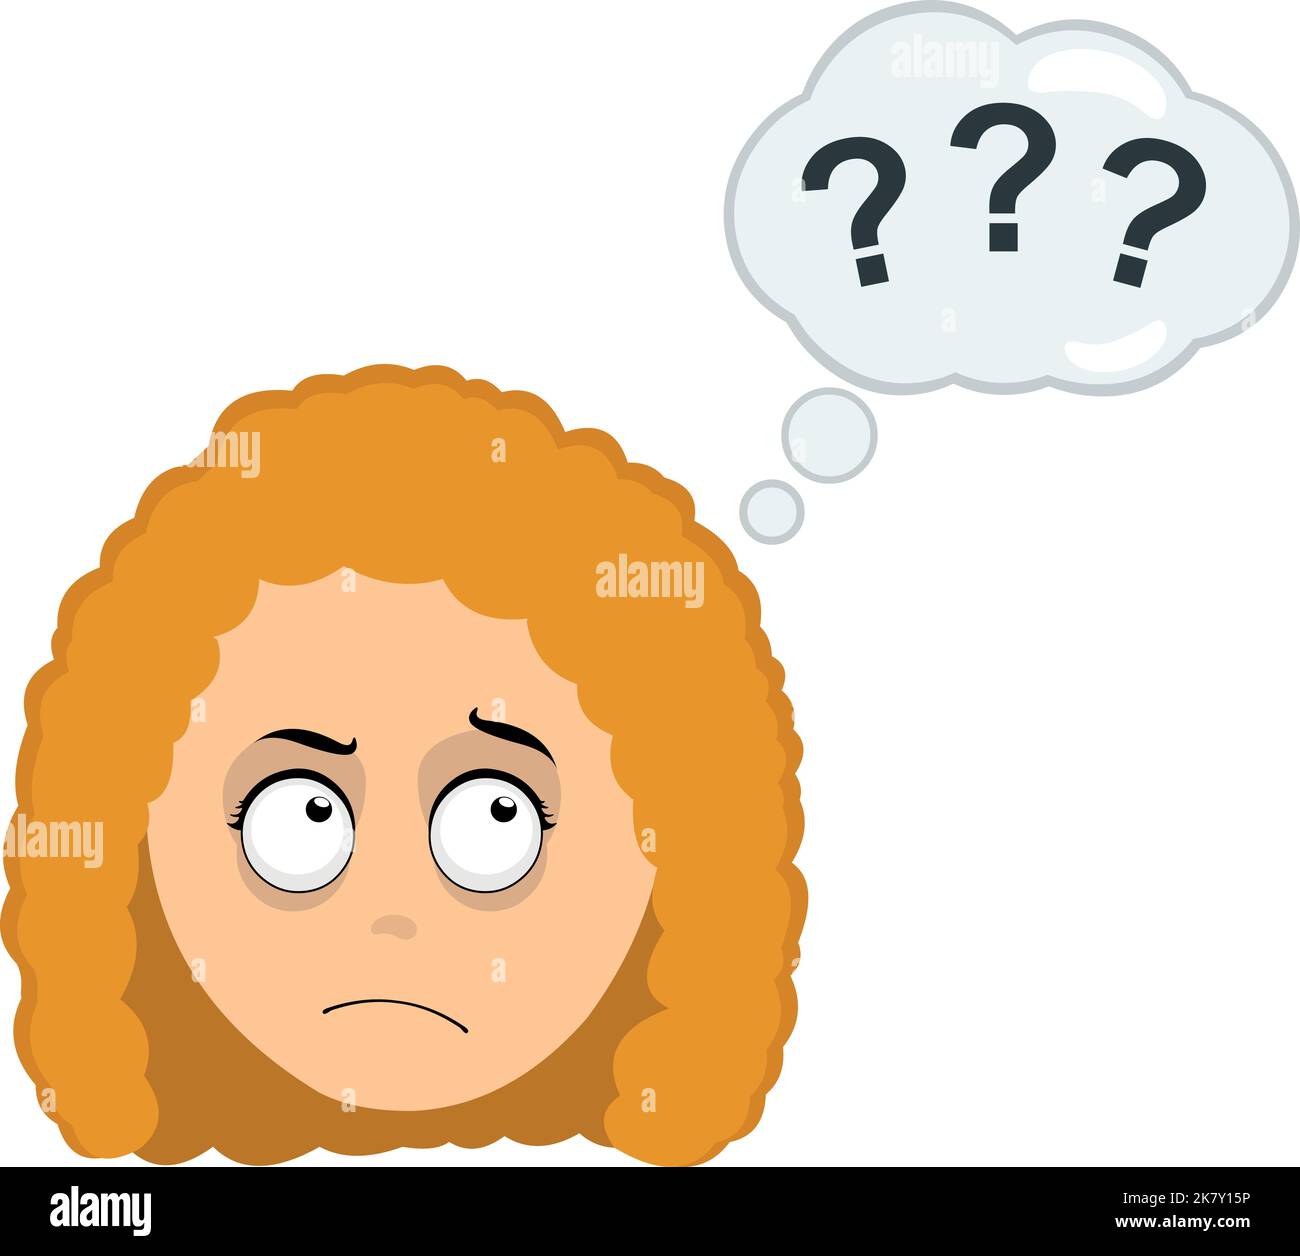 Vector illustration of a cartoon woman with a thinking or doubt expression, with a thought cloud and question marks Stock Vector